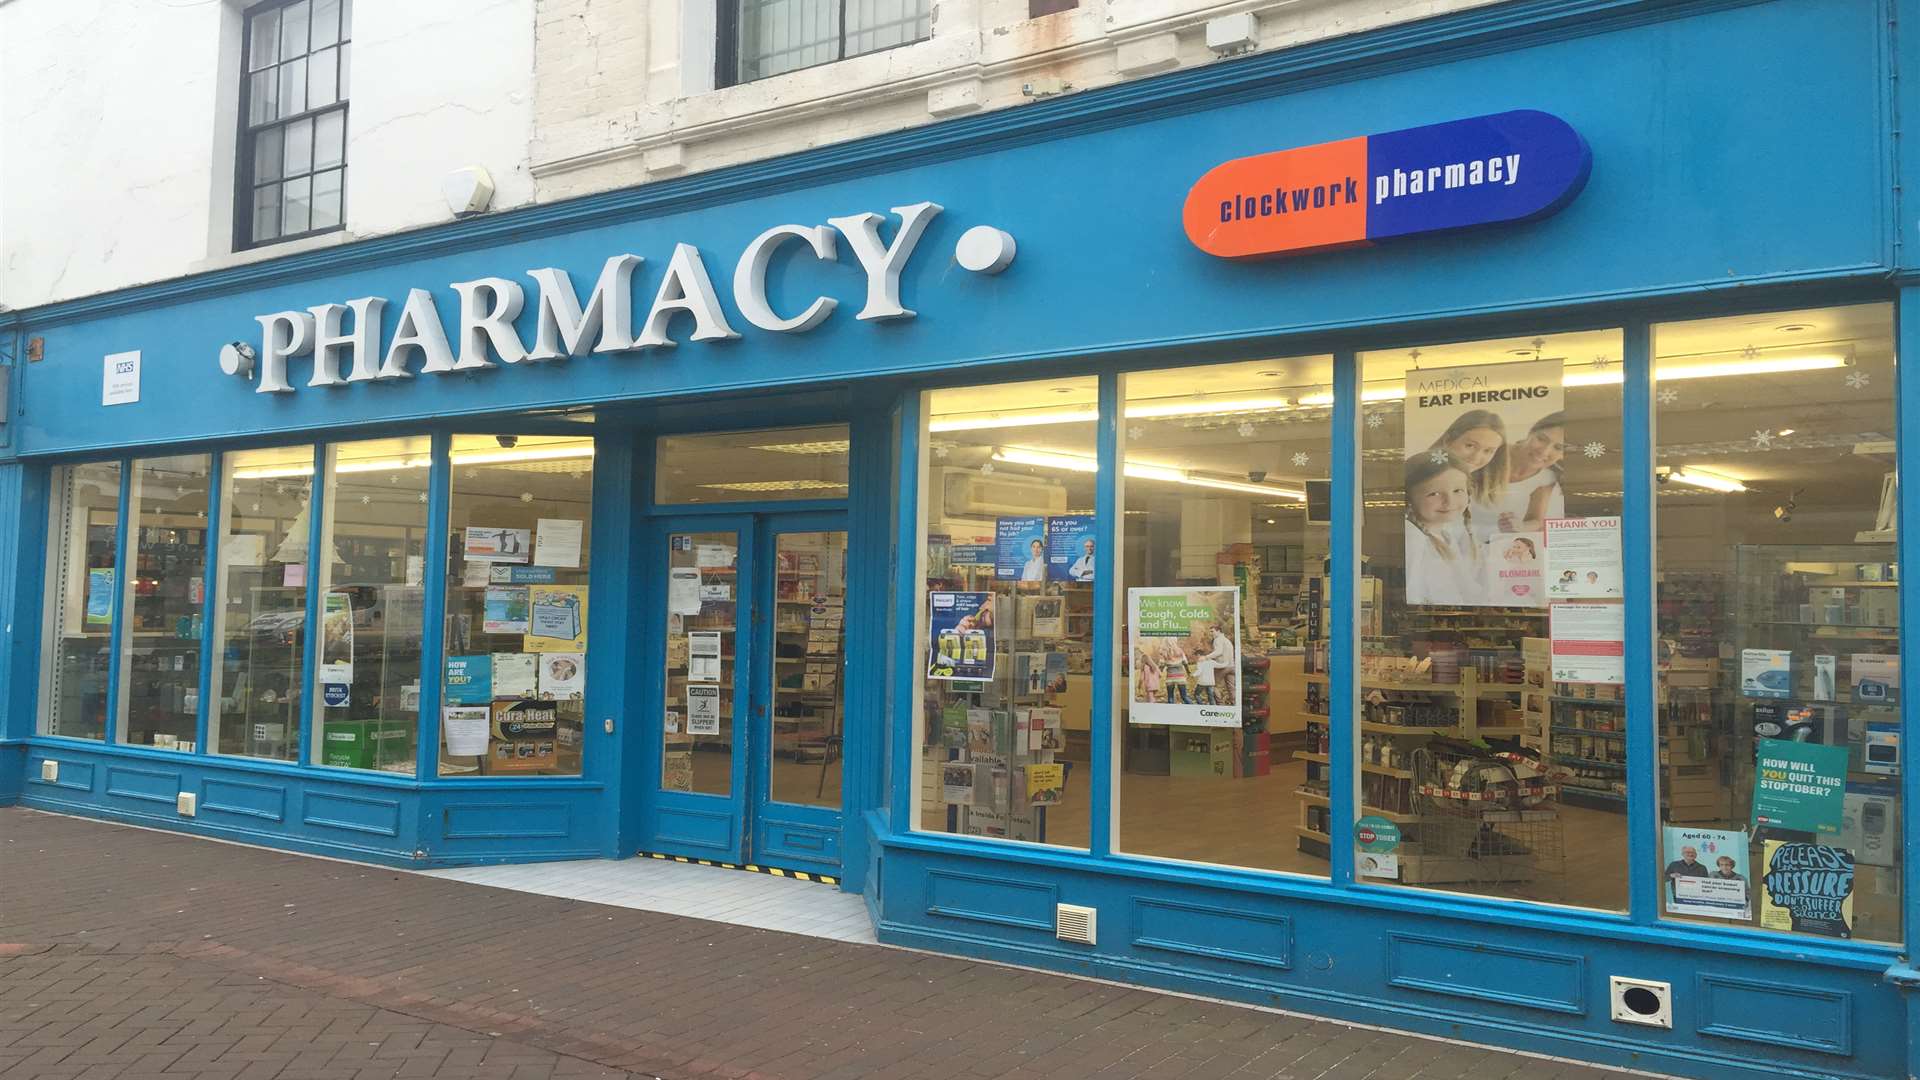 Police called to reports of a burglary at this pharmacy found two men inside